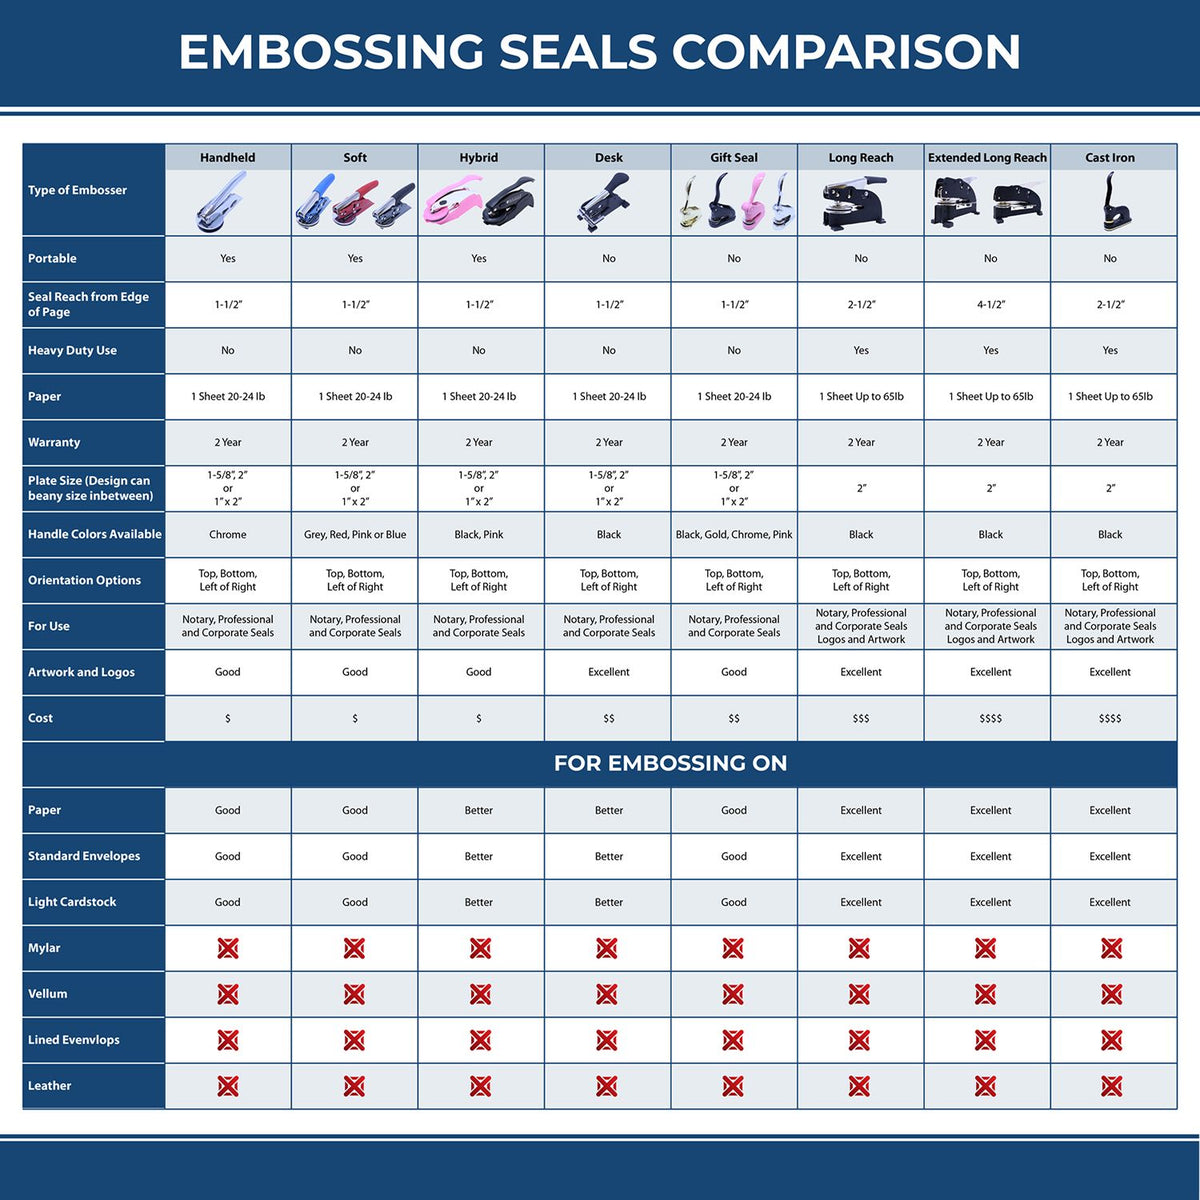 A comparison chart for the different types of mount models available for the Handheld Indiana Professional Geologist Embosser